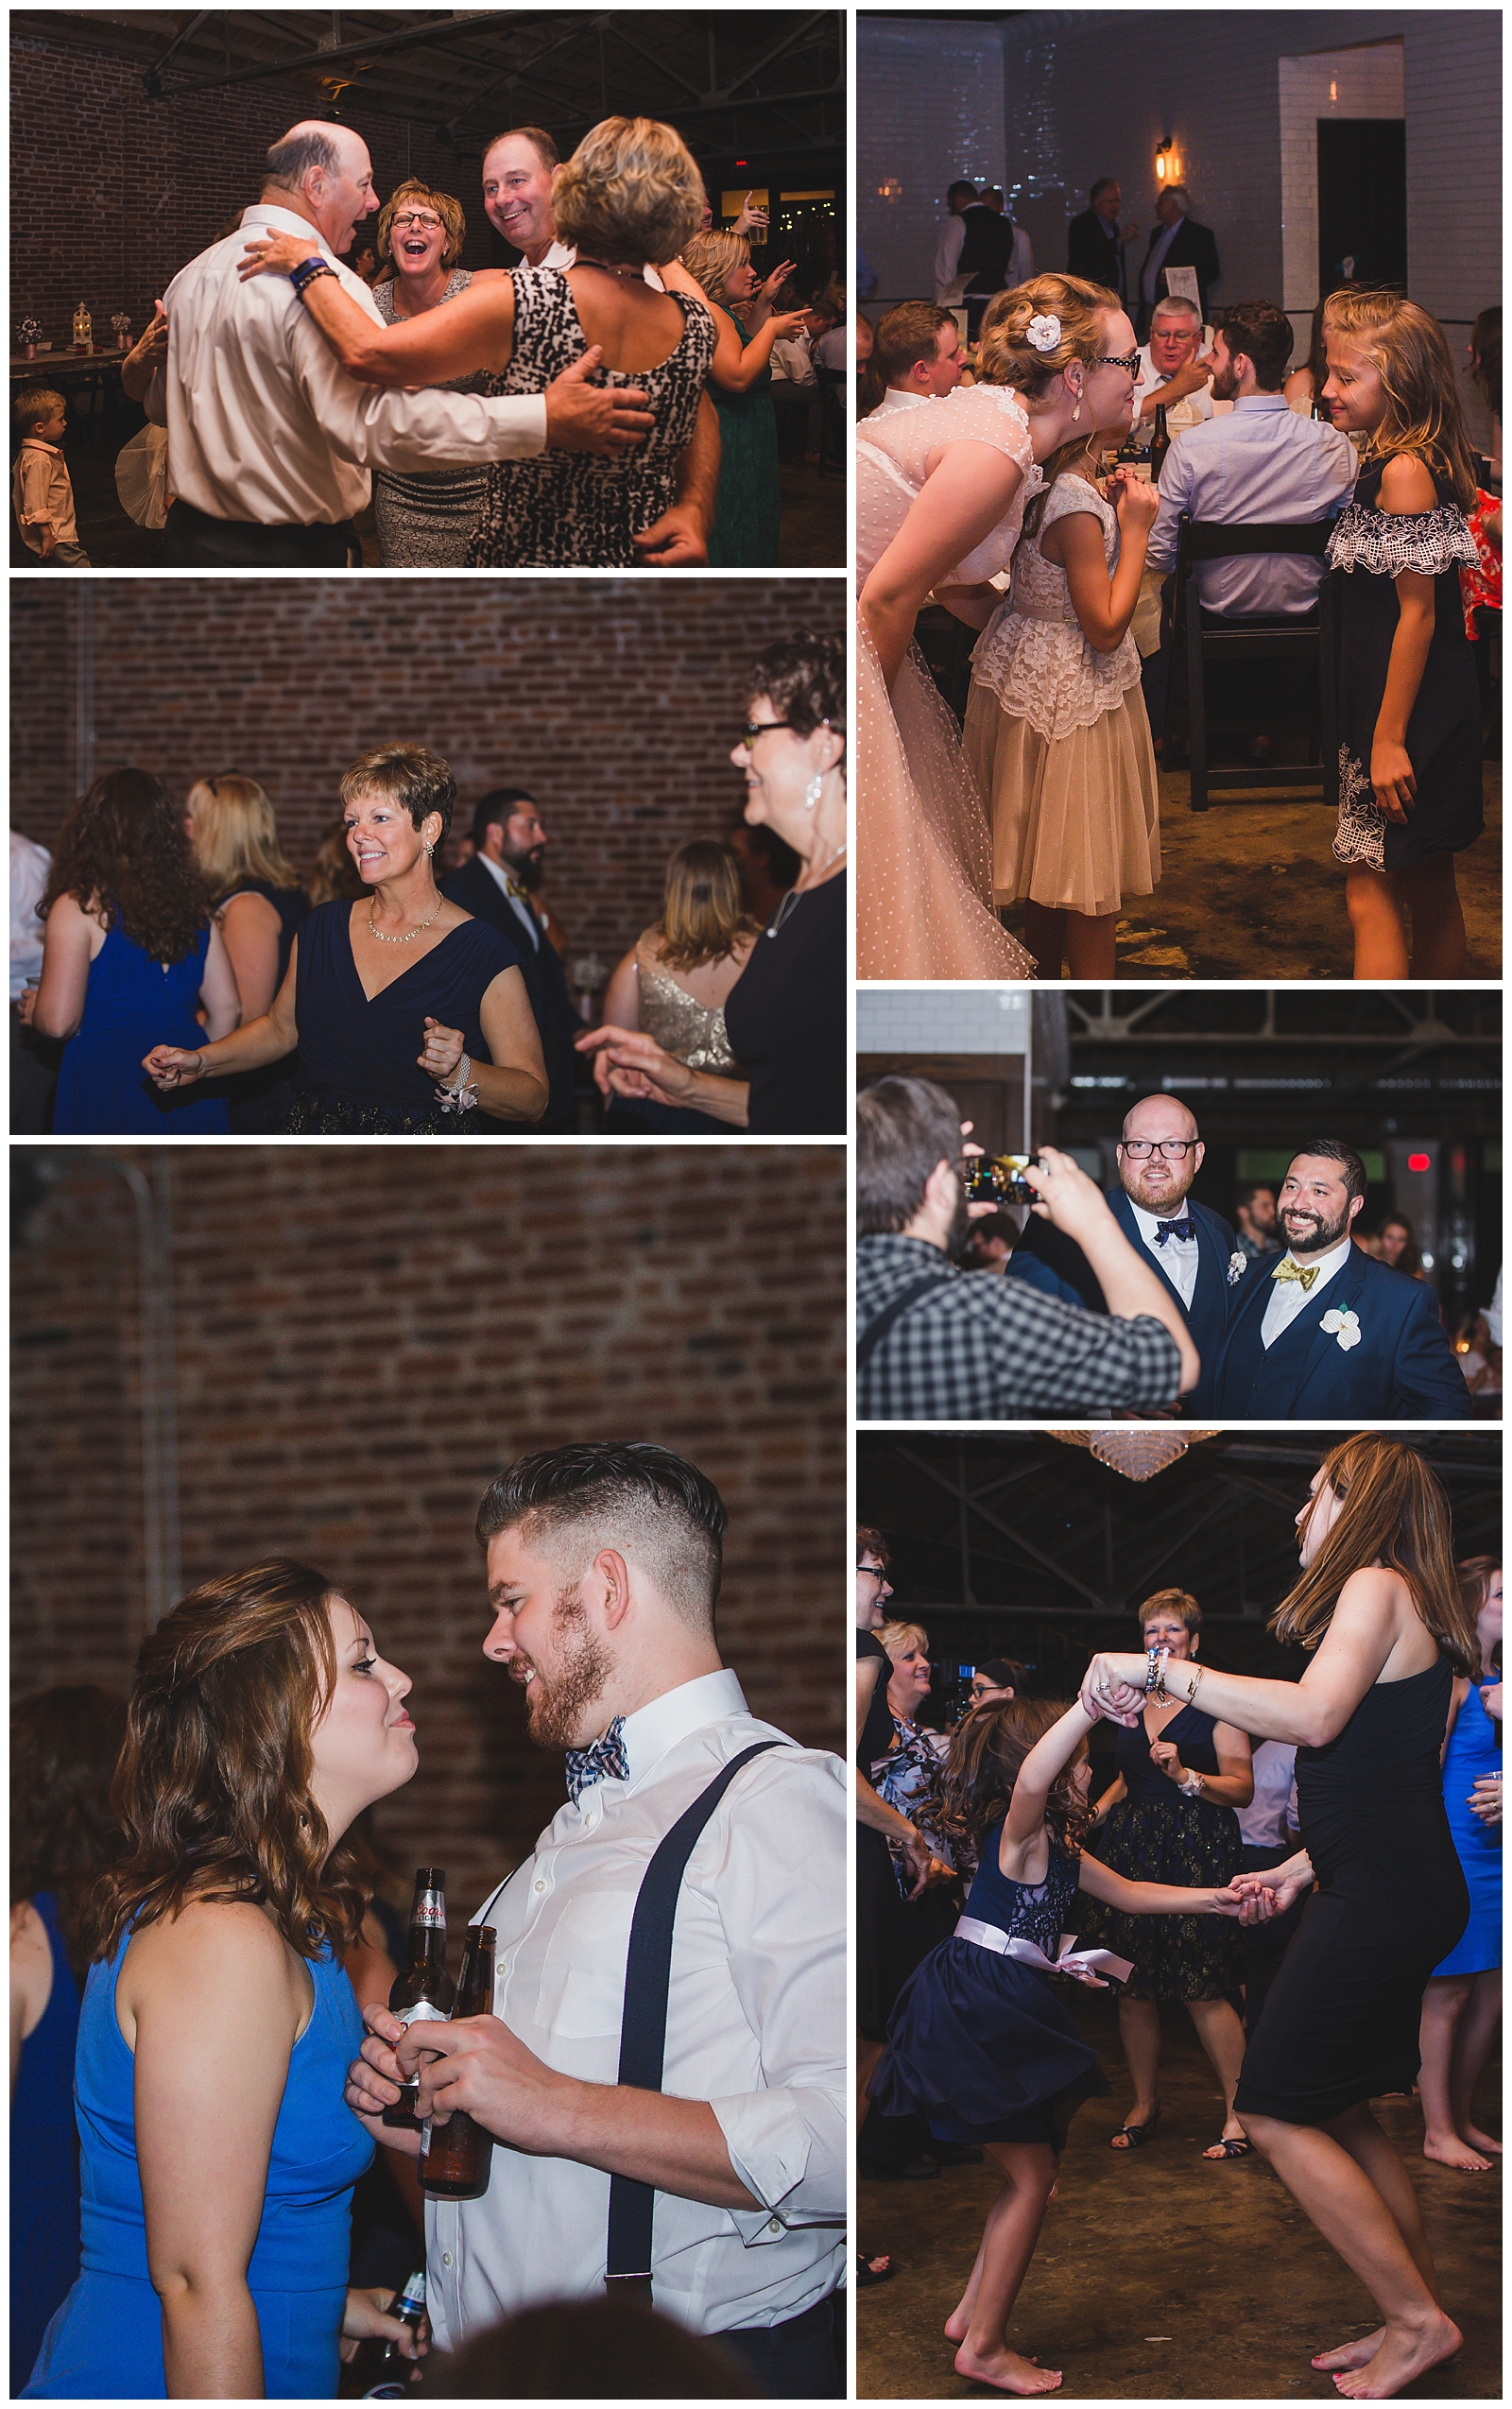 Wedding photography at The Guild by Kansas City wedding photographers Wisdom-Watson Weddings.